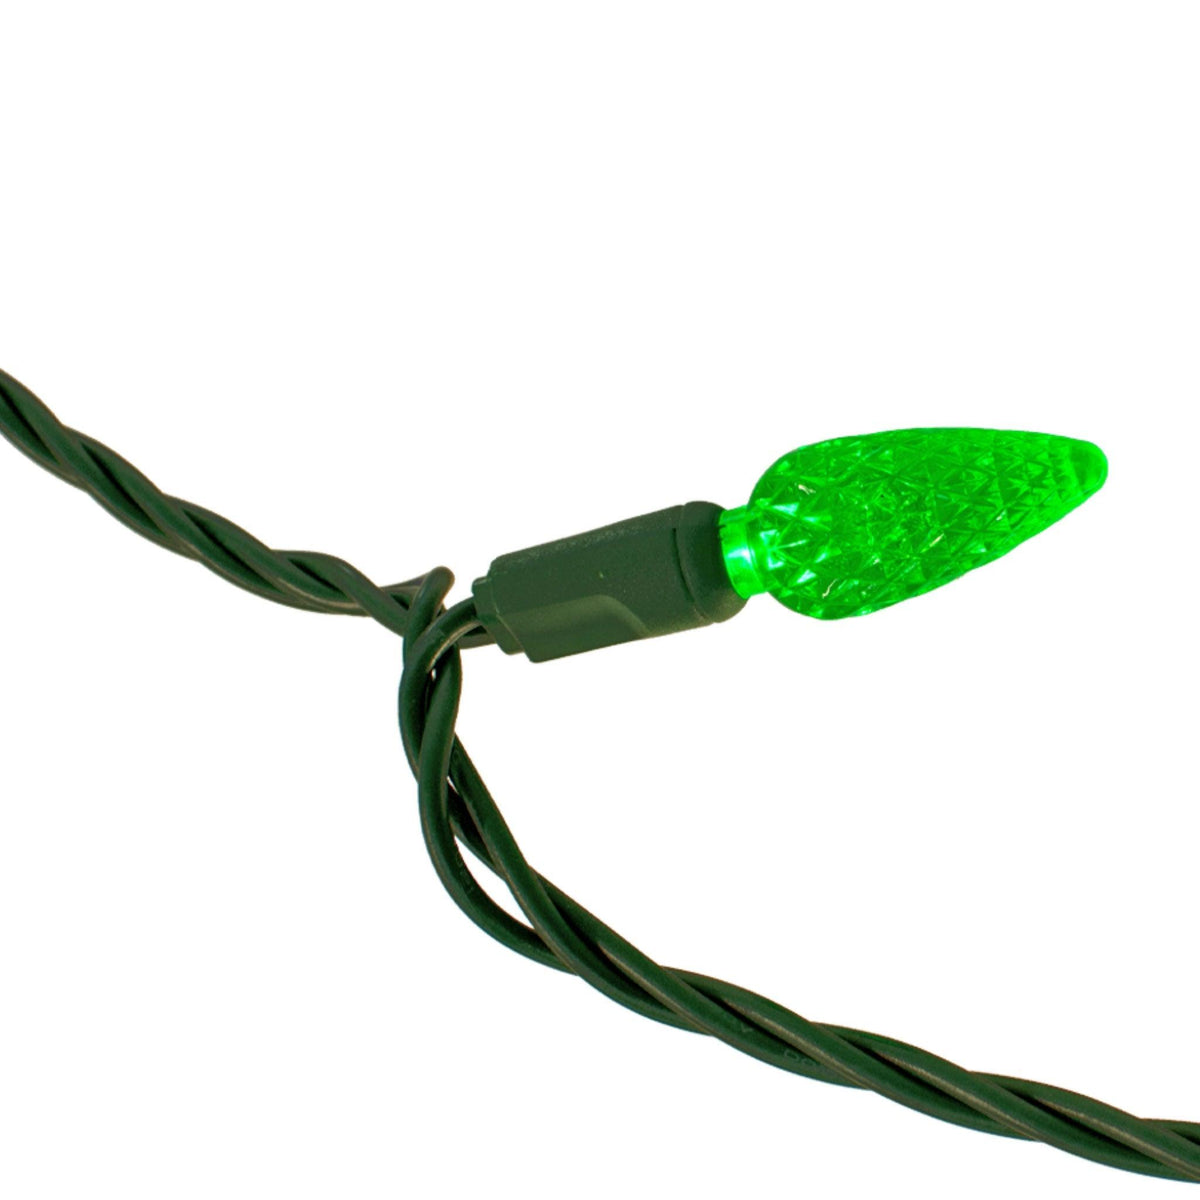 LED Multi-Color C6 Light Bulbs with 18FT Green Wire Christmas String on sale at leedisplay.com